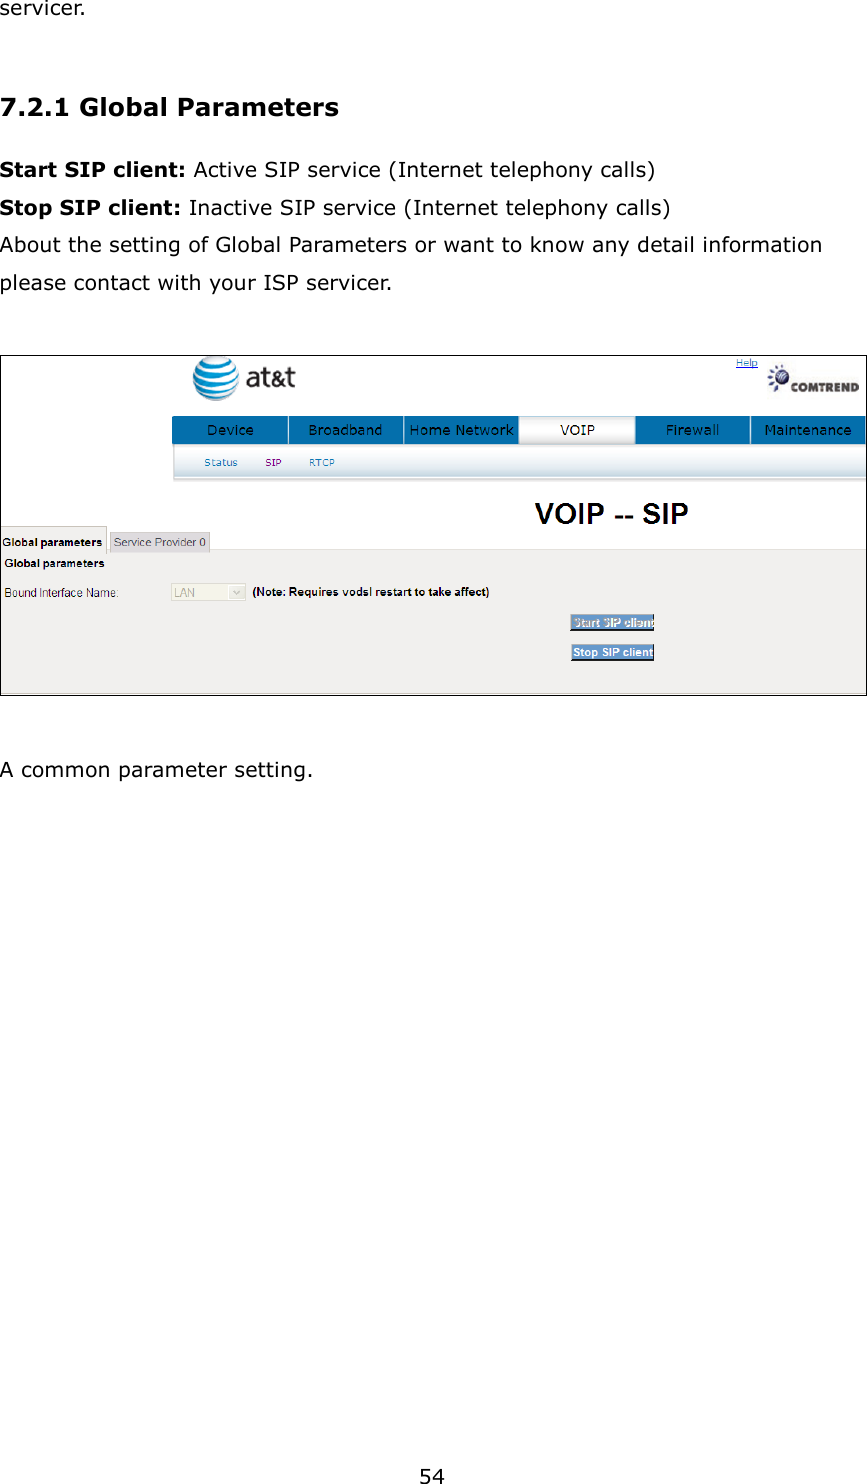 54 servicer.  7.2.1 Global Parameters Start SIP client: Active SIP service (Internet telephony calls)   Stop SIP client: Inactive SIP service (Internet telephony calls) About the setting of Global Parameters or want to know any detail information please contact with your ISP servicer.   A common parameter setting.                